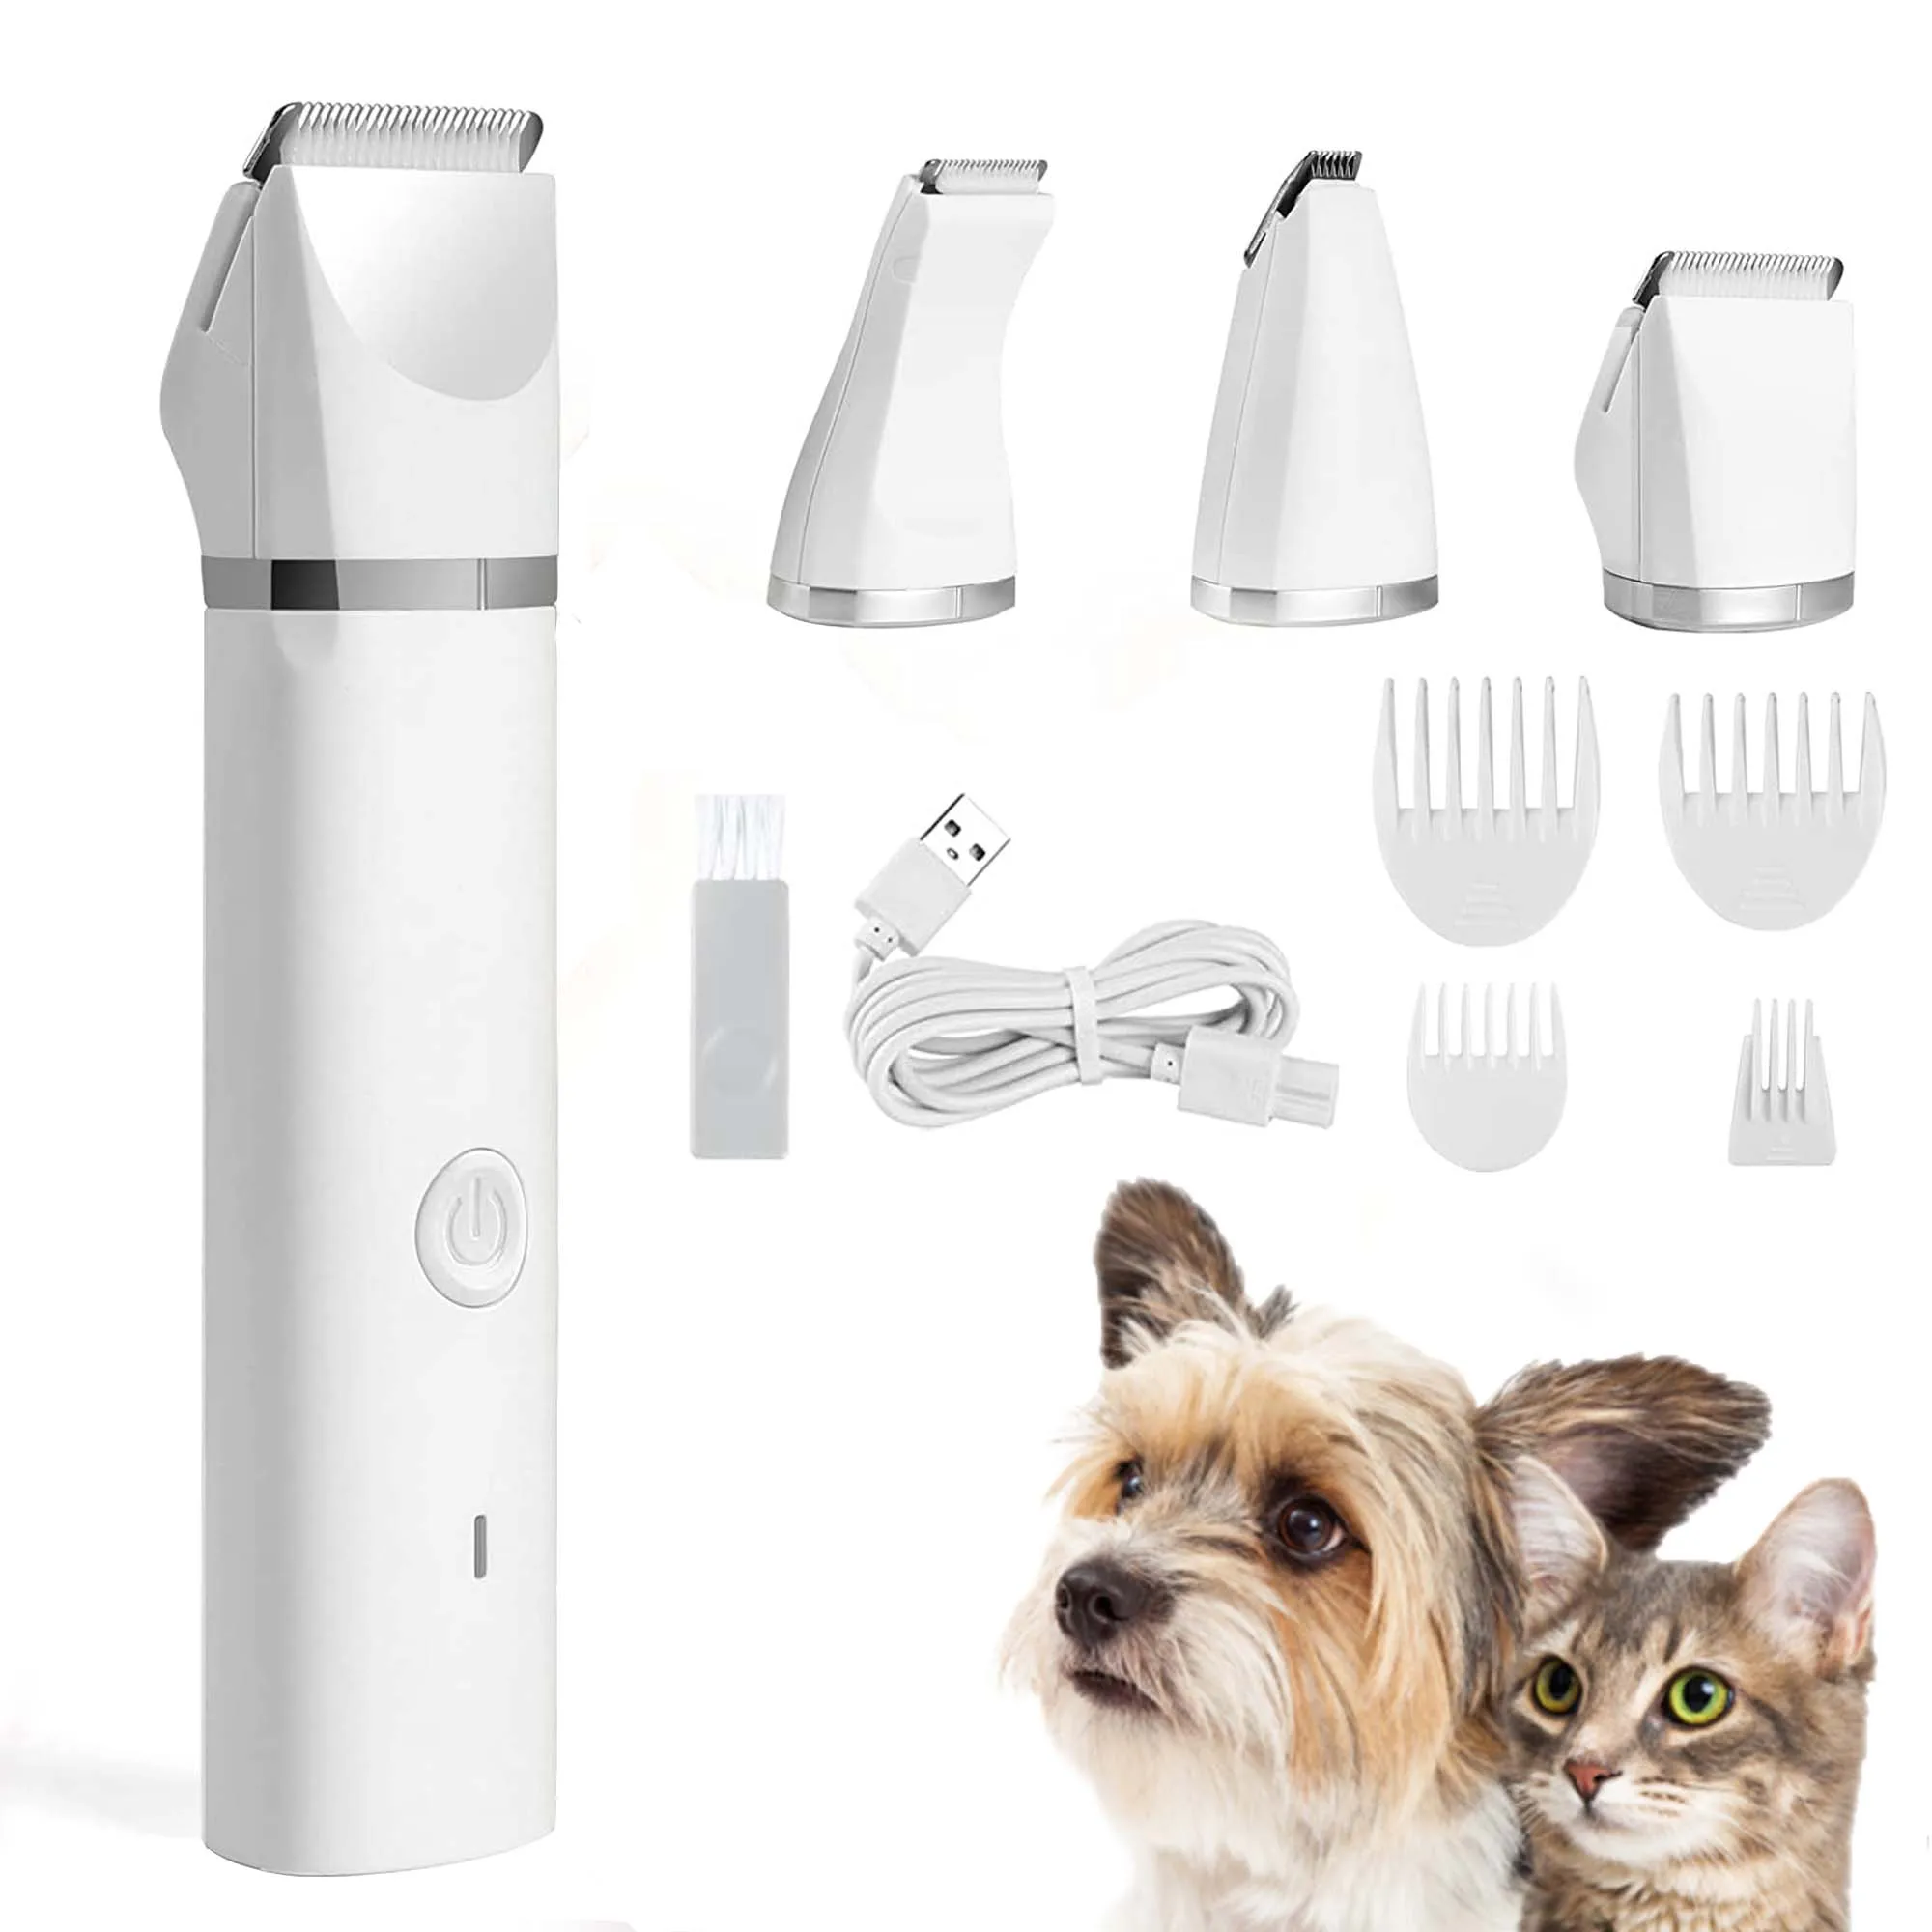 Dog Clippers Washable,2020 New Upgrade Dog Grooming Kit Waterproof Professional Pet Grooming Kit Electric Dog Trimmers Clippers Cordless，USB Rechargeable Low Noise Pet Shaver for Dogs Rabbits Cats 